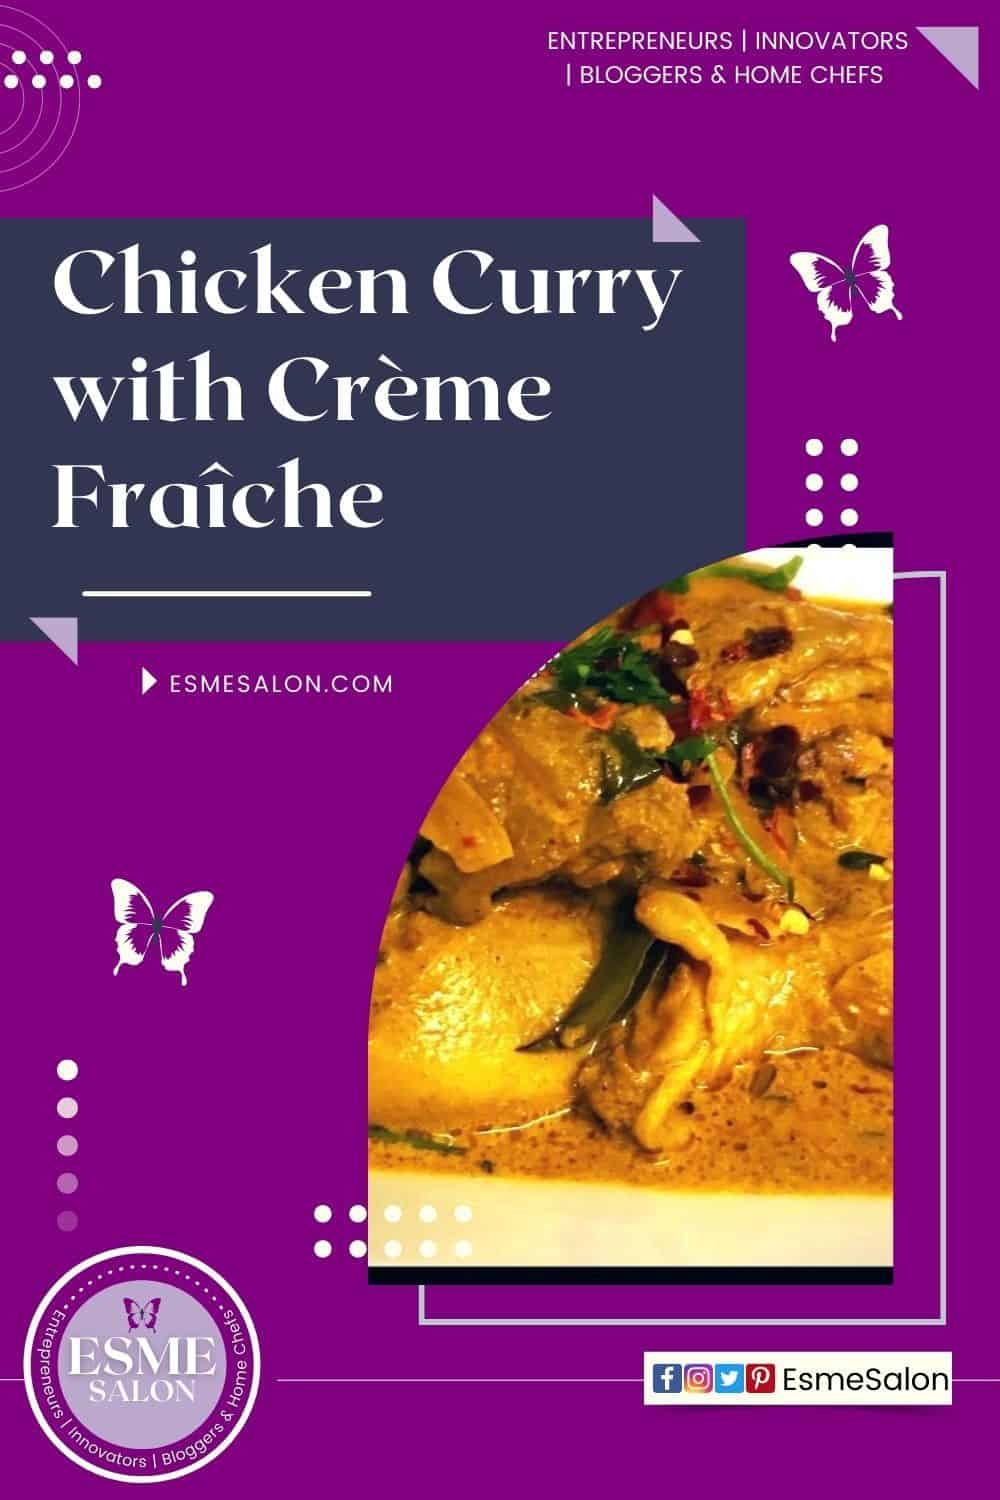 Chicken Curry with Crème Fraîche similar to Butter chicken